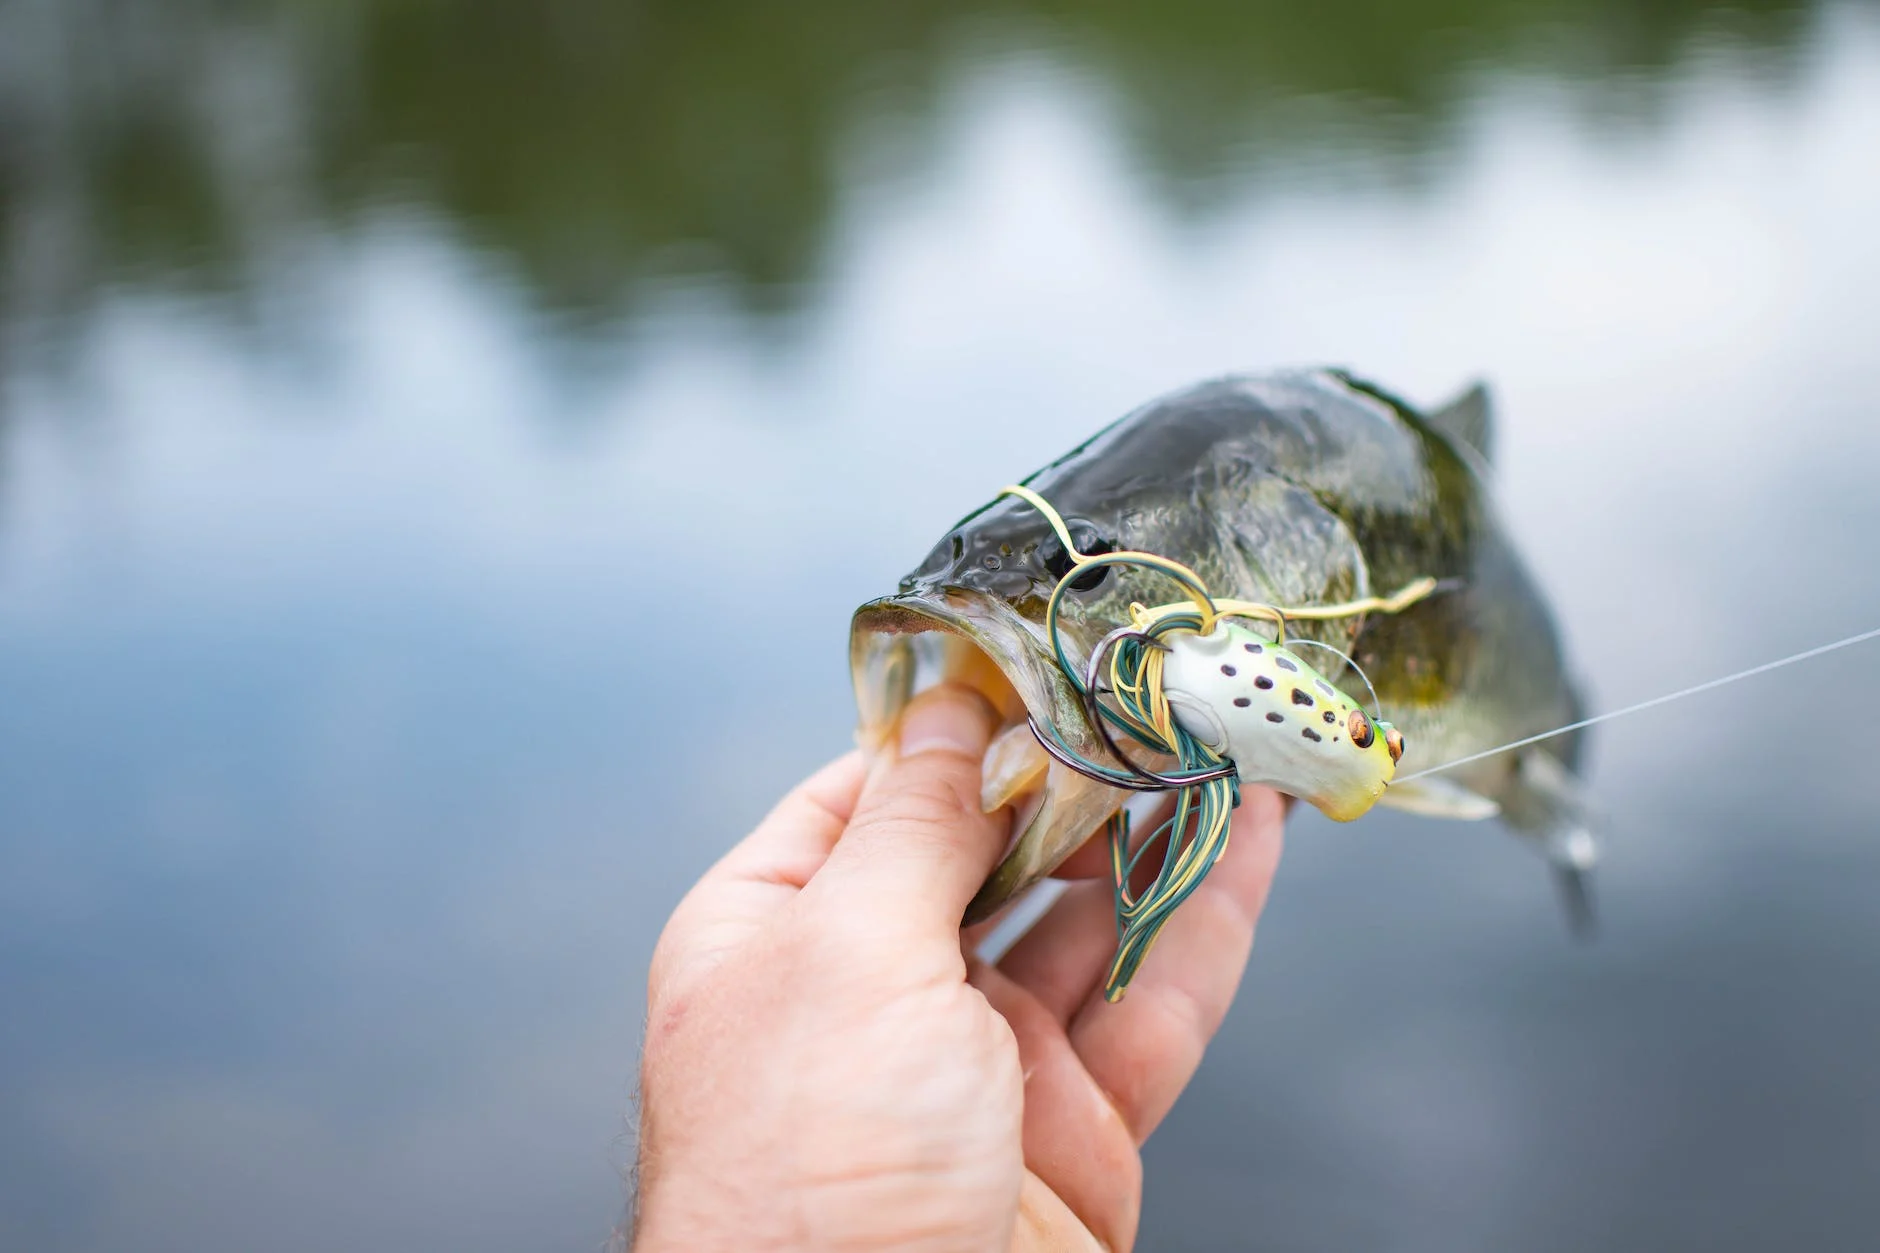 Big Mouth Bass: A Guide to the Best Fishing Spots Around the World.